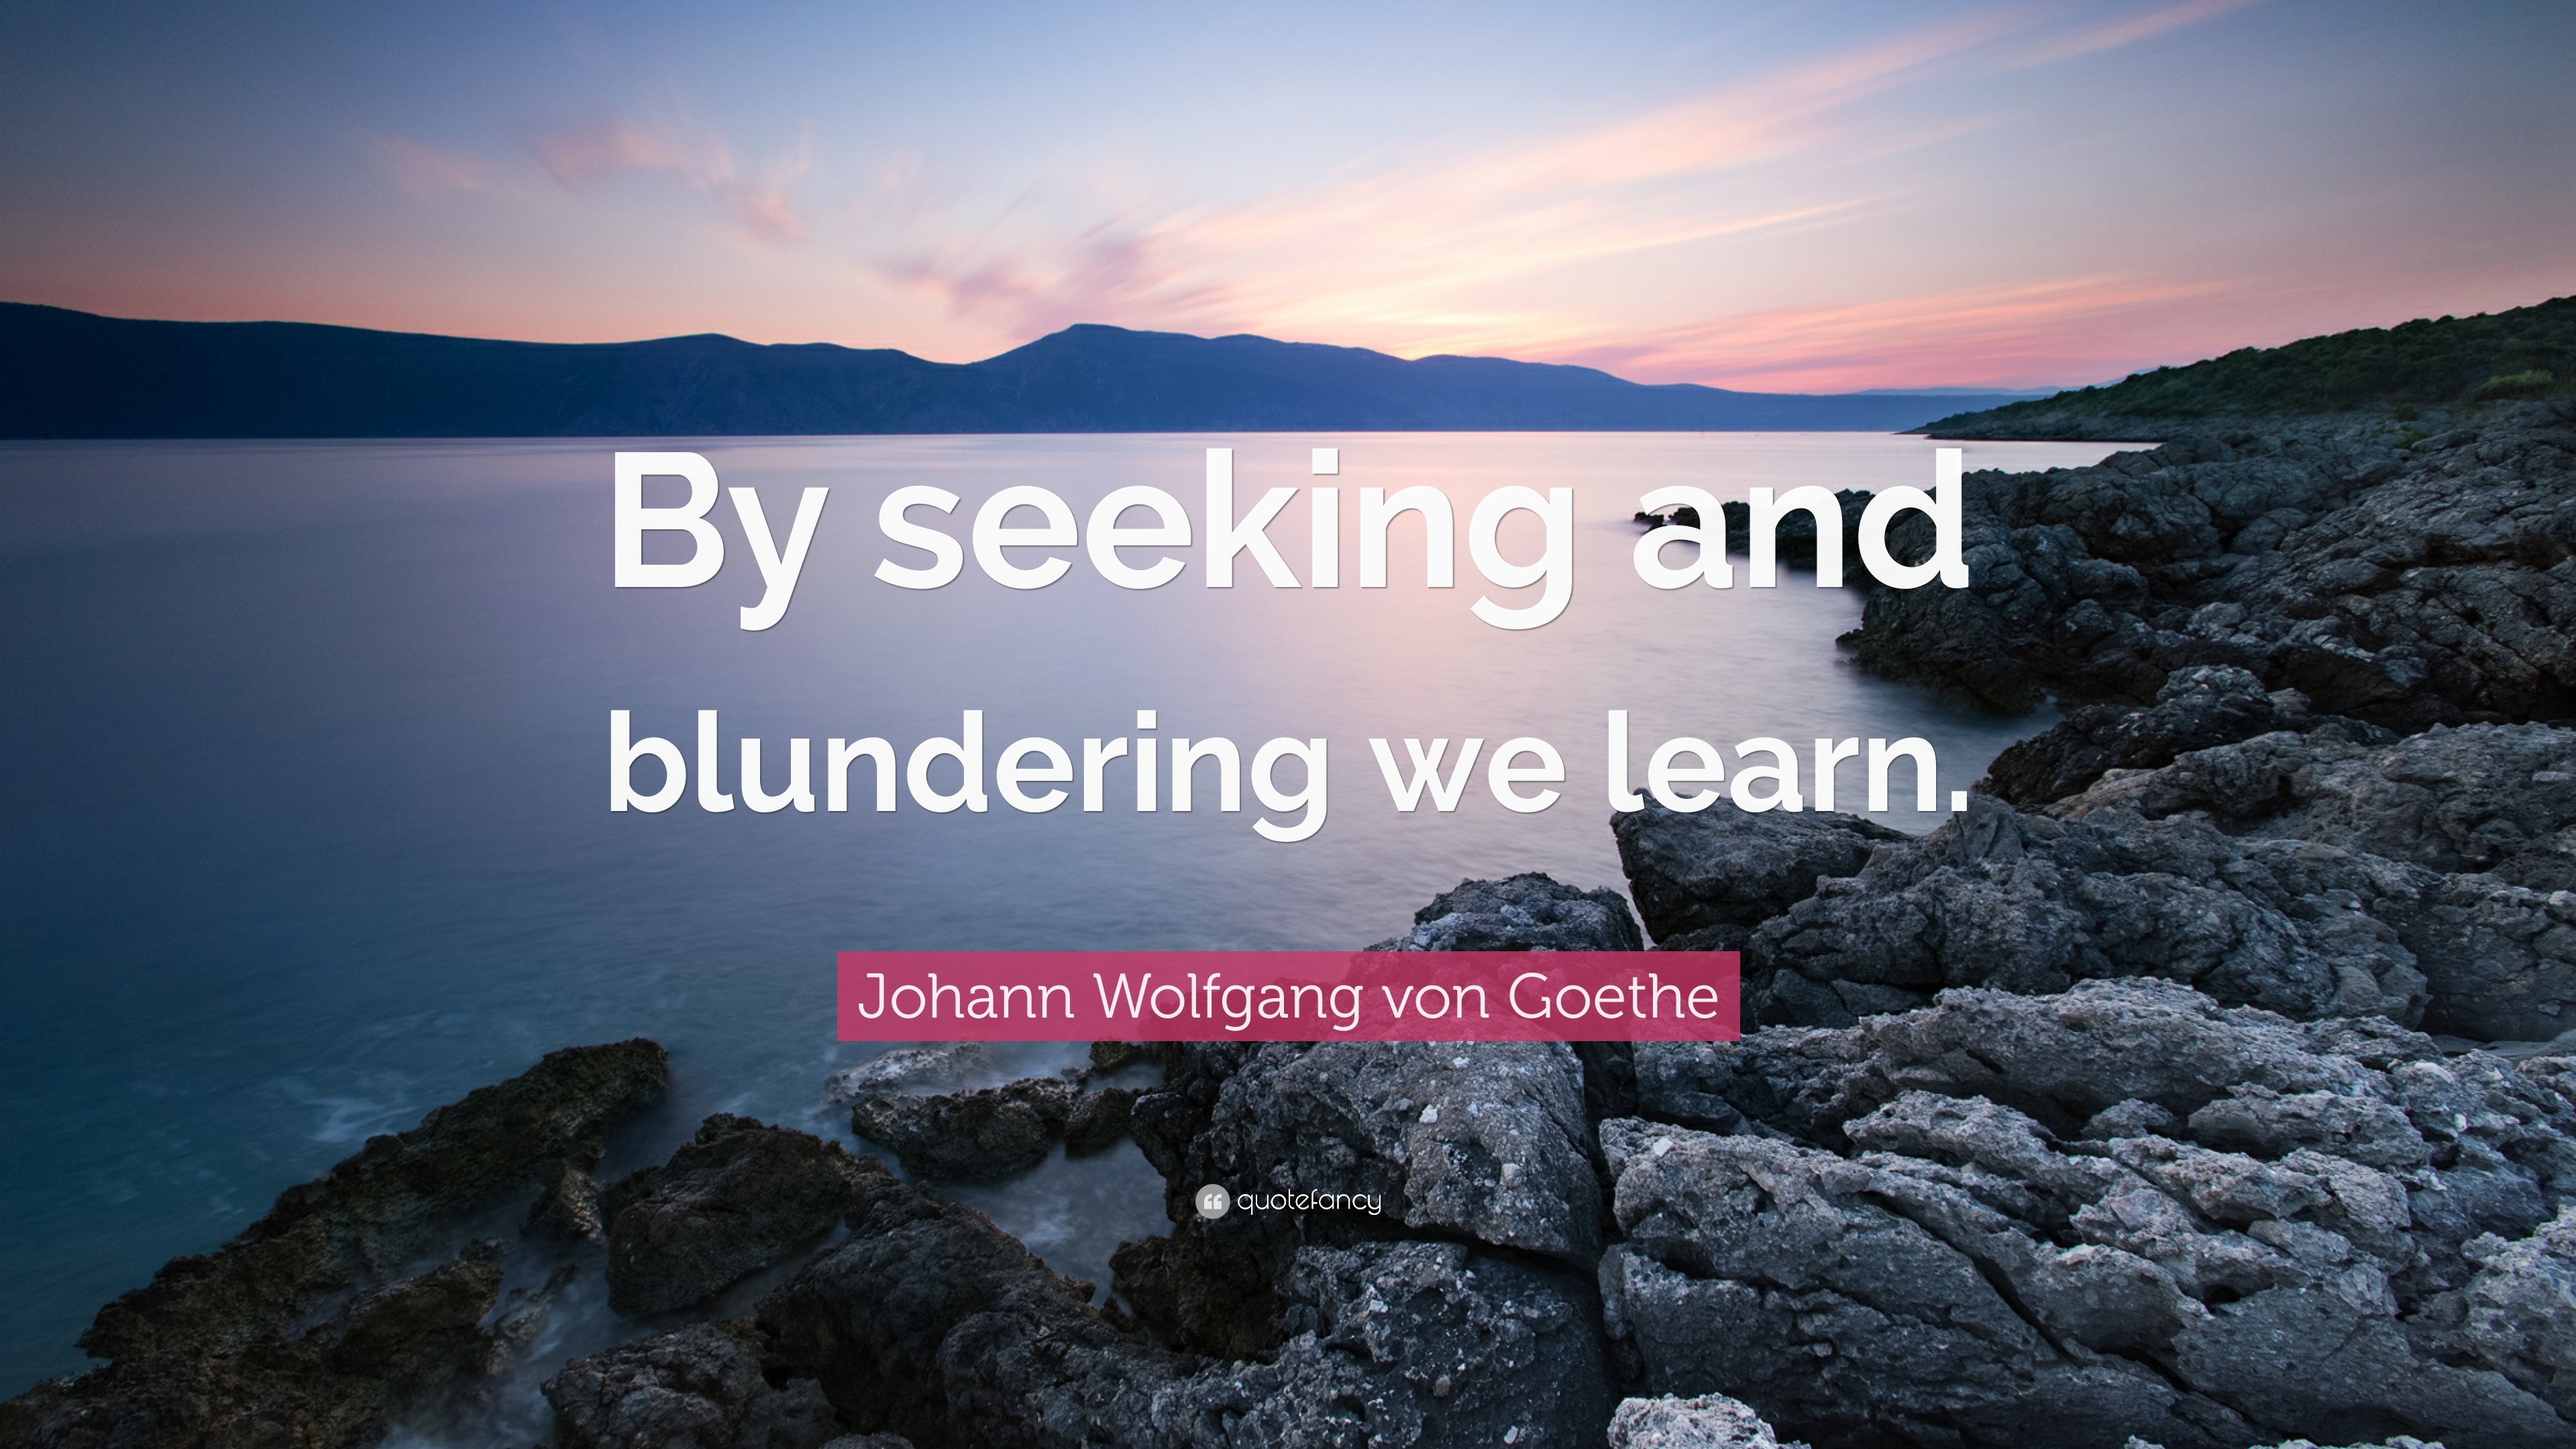 By seeking and blundering we learn.